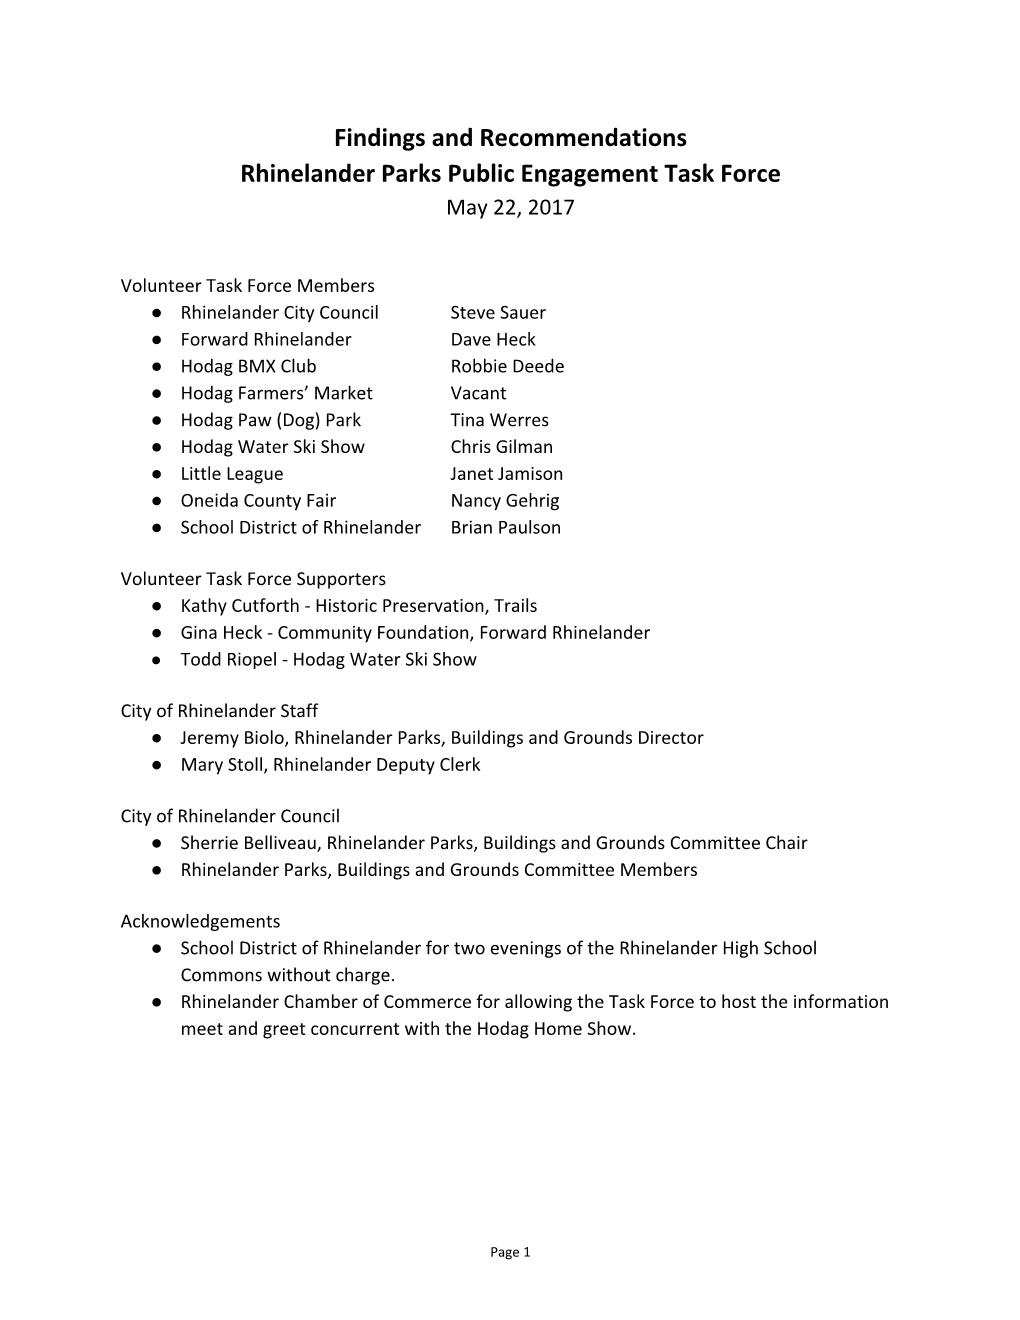 Findings and Recommendations Rhinelander Parks Public Engagement Task Force May 22, 2017